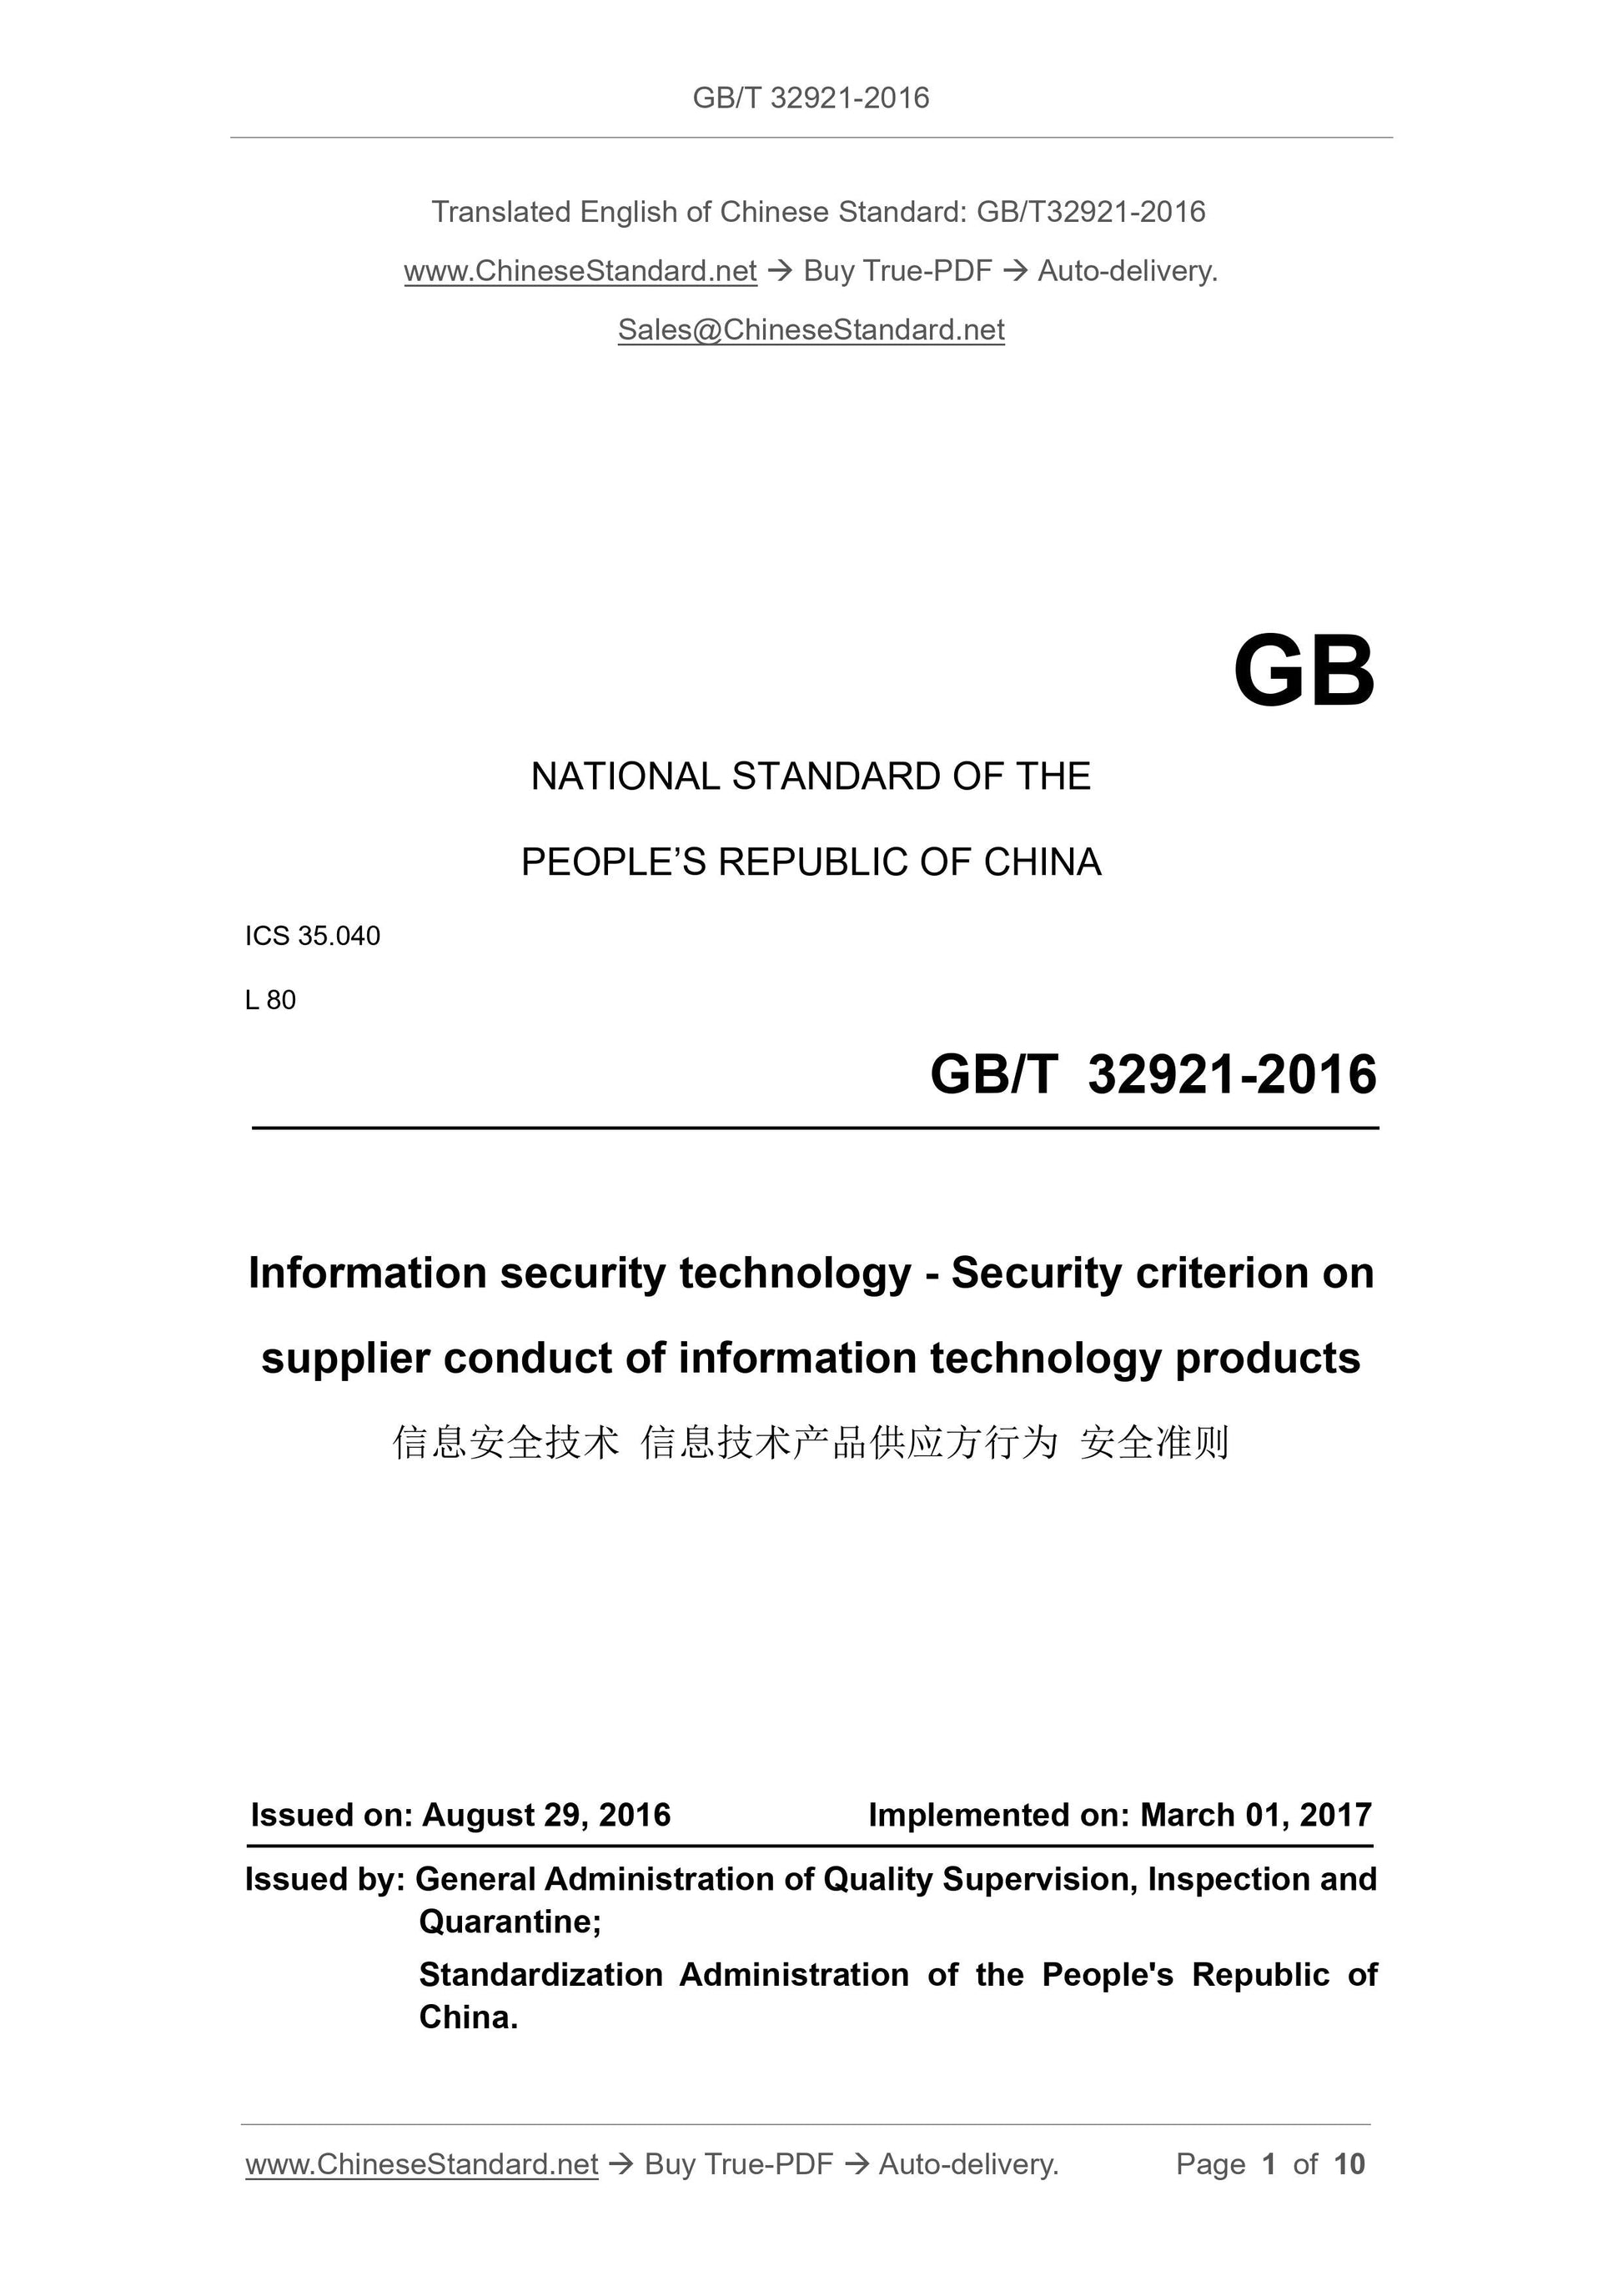 GB/T 32921-2016 Page 1